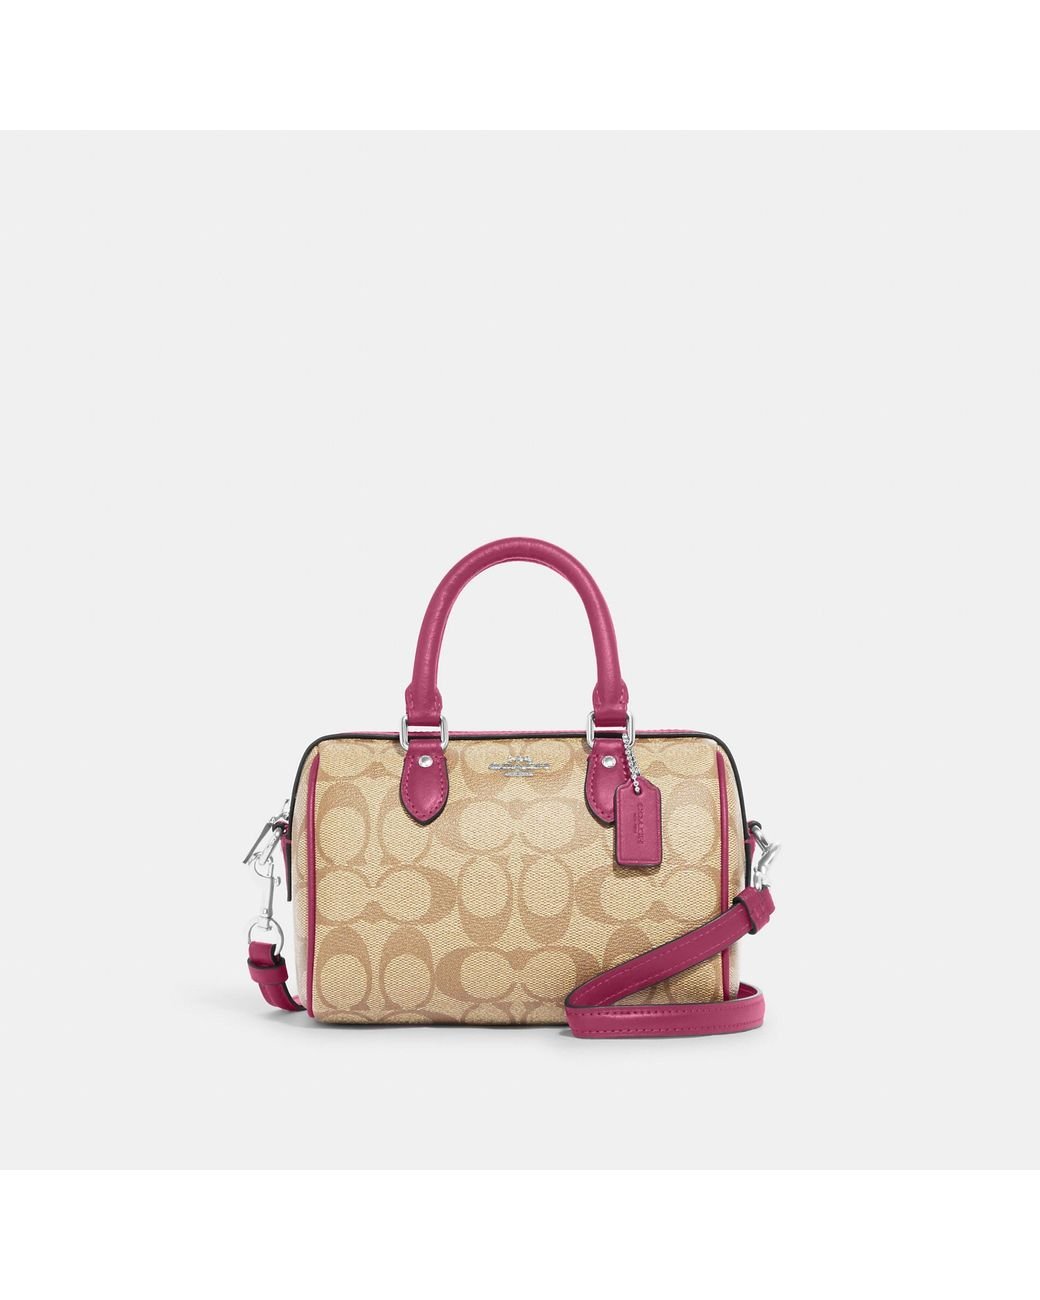 Coach Outlet Mini Rowan Crossbody In Signature Canvas in Pink